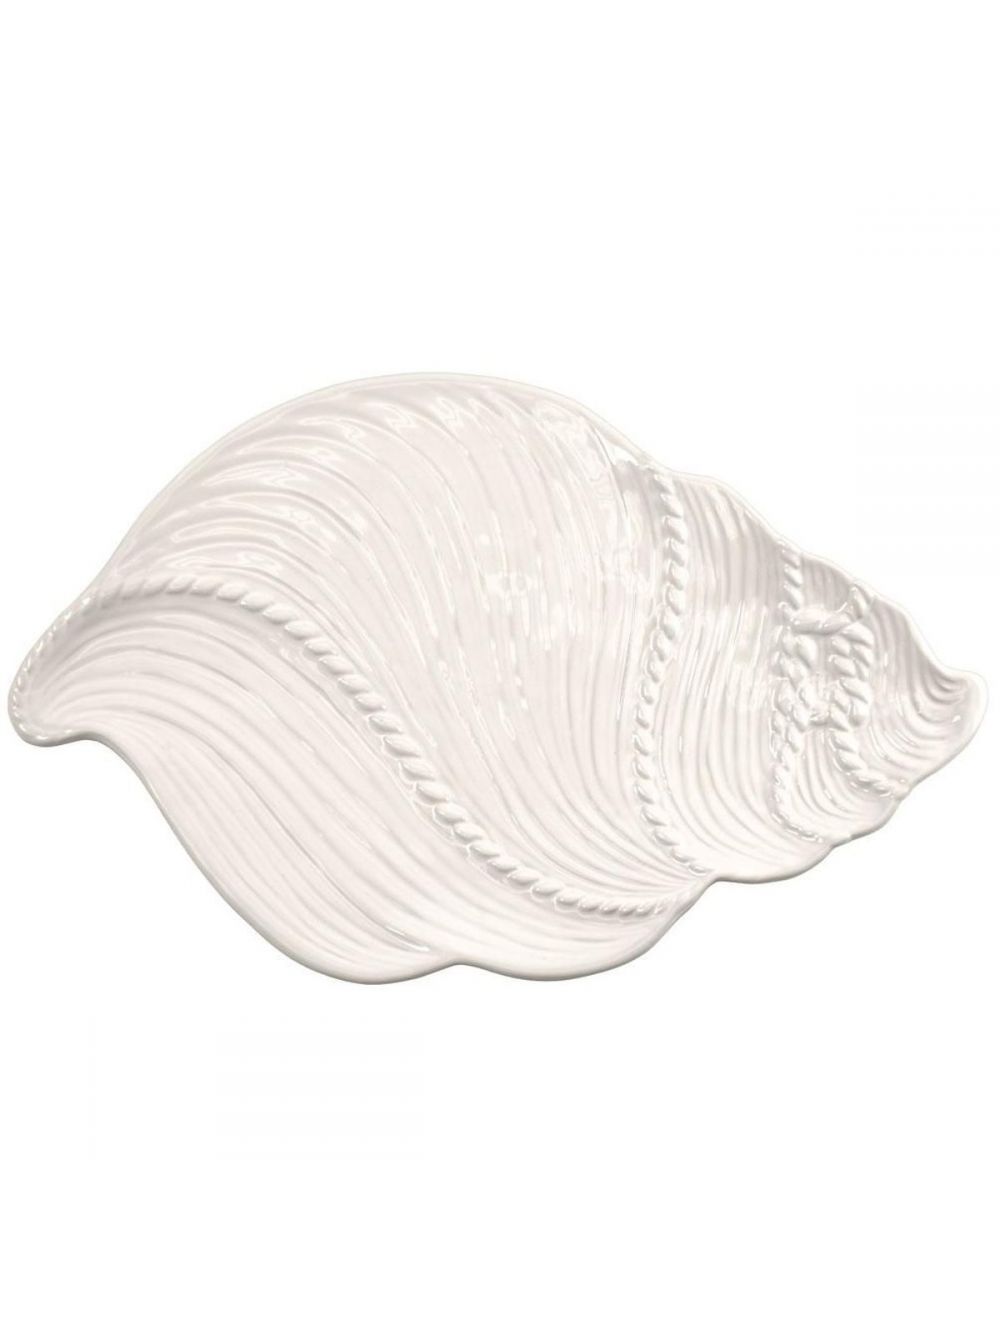 Temp-tations Knotical Platter 18 Inch-TH01557-classic white